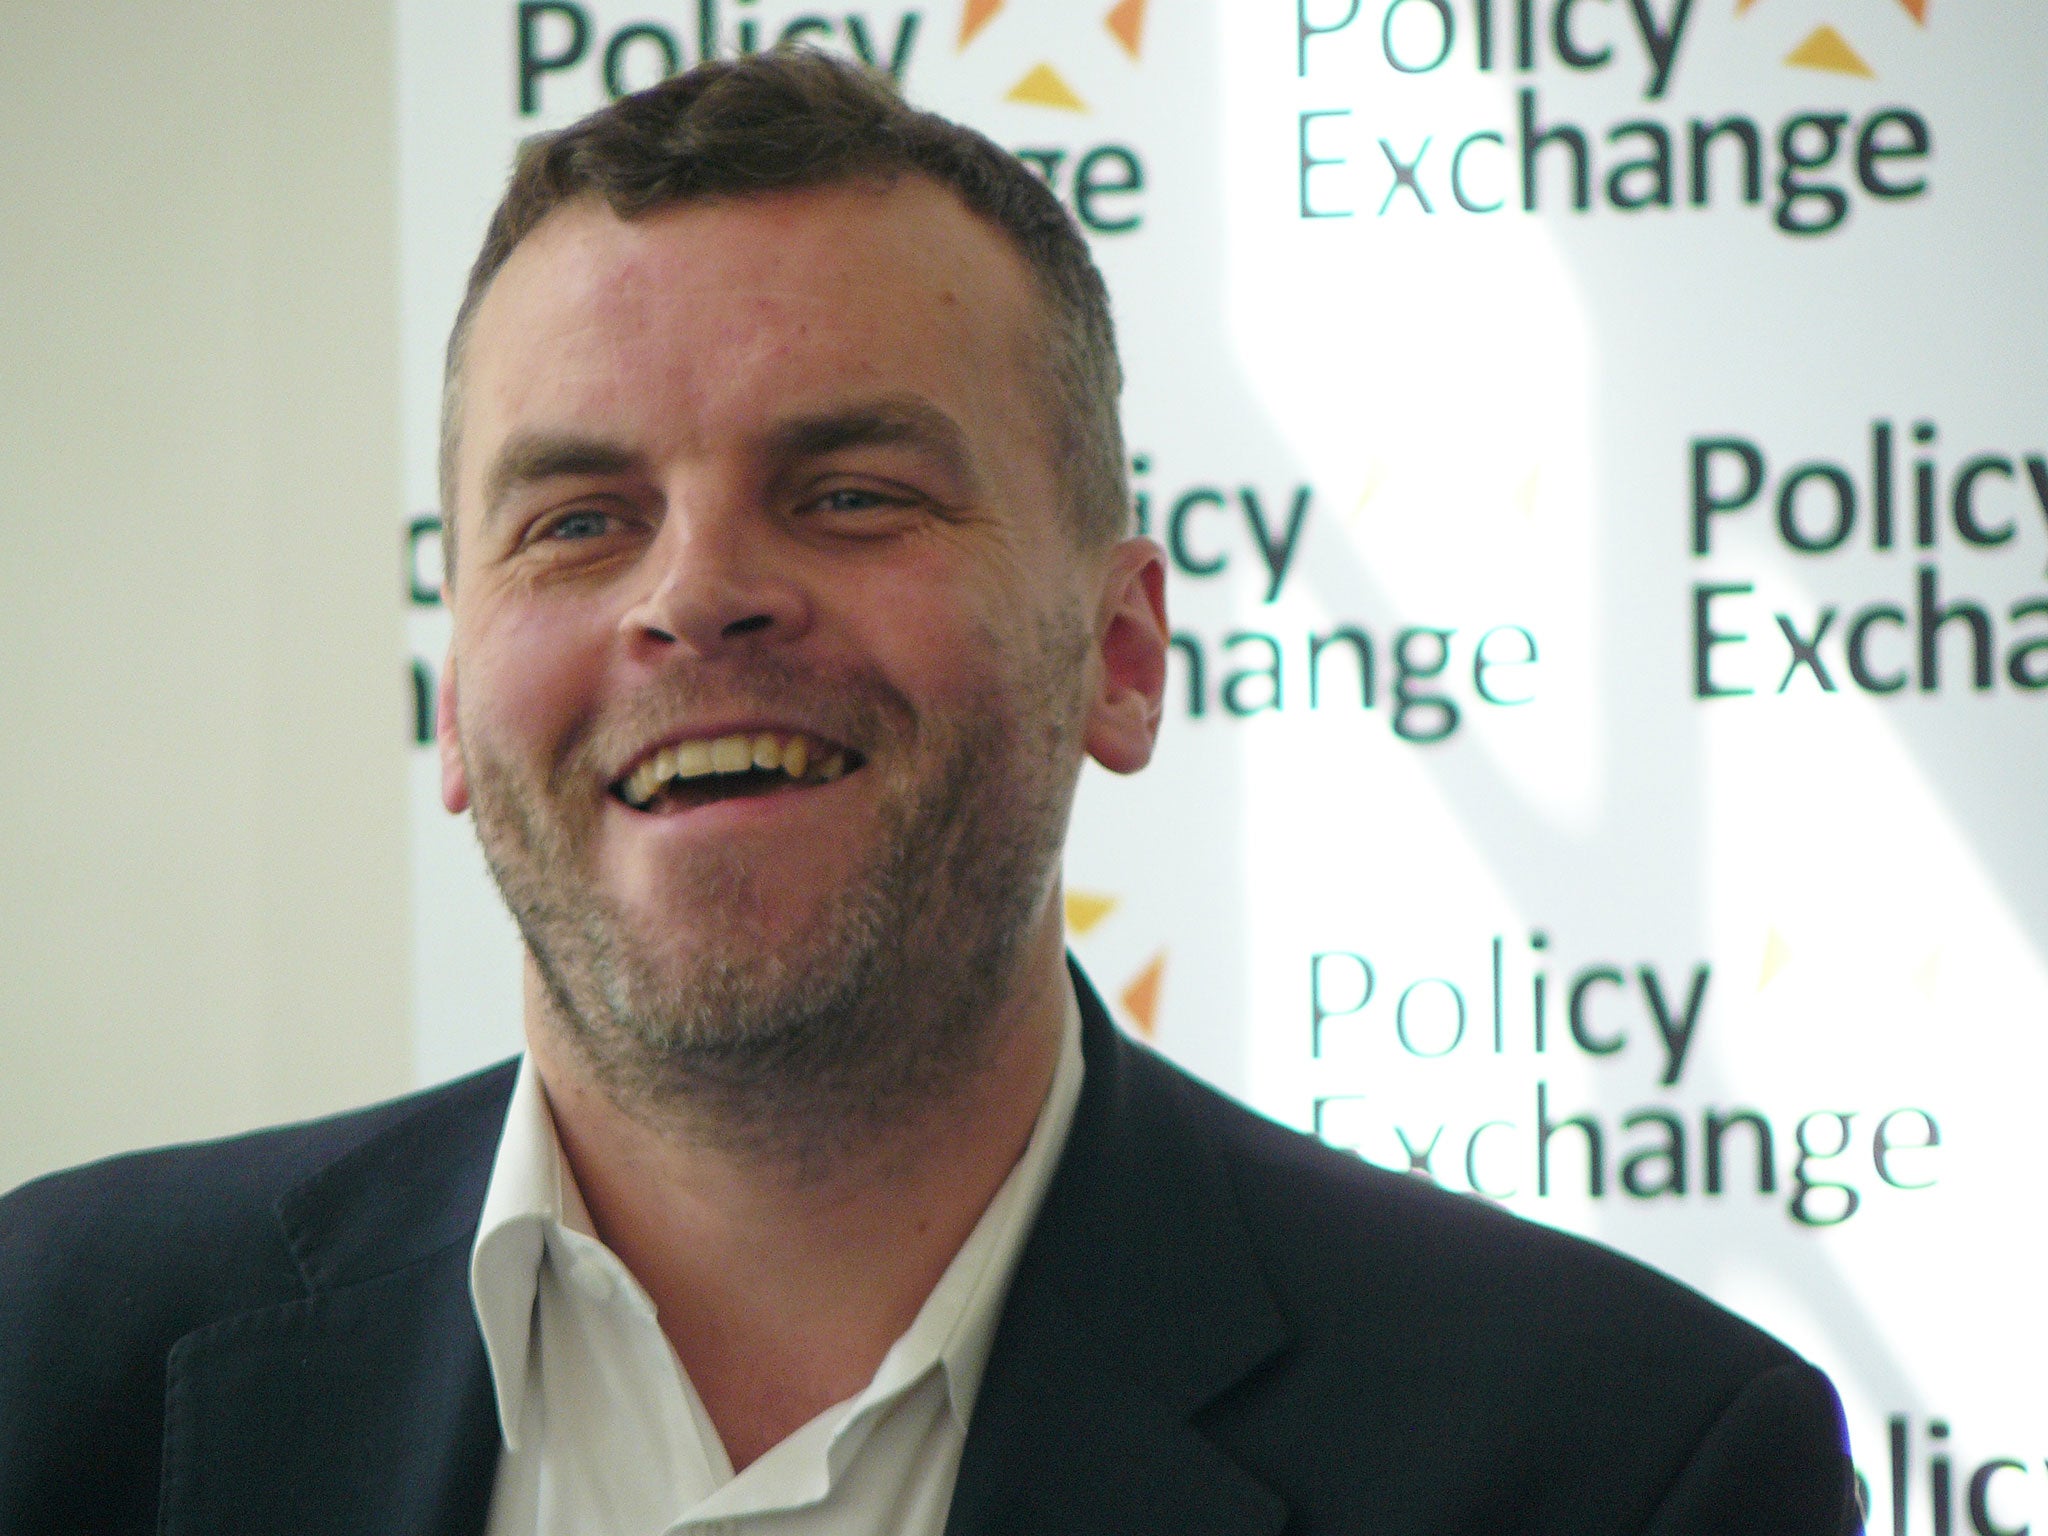 Tim Montgomerie has been a prominent Conservative activist and commentator